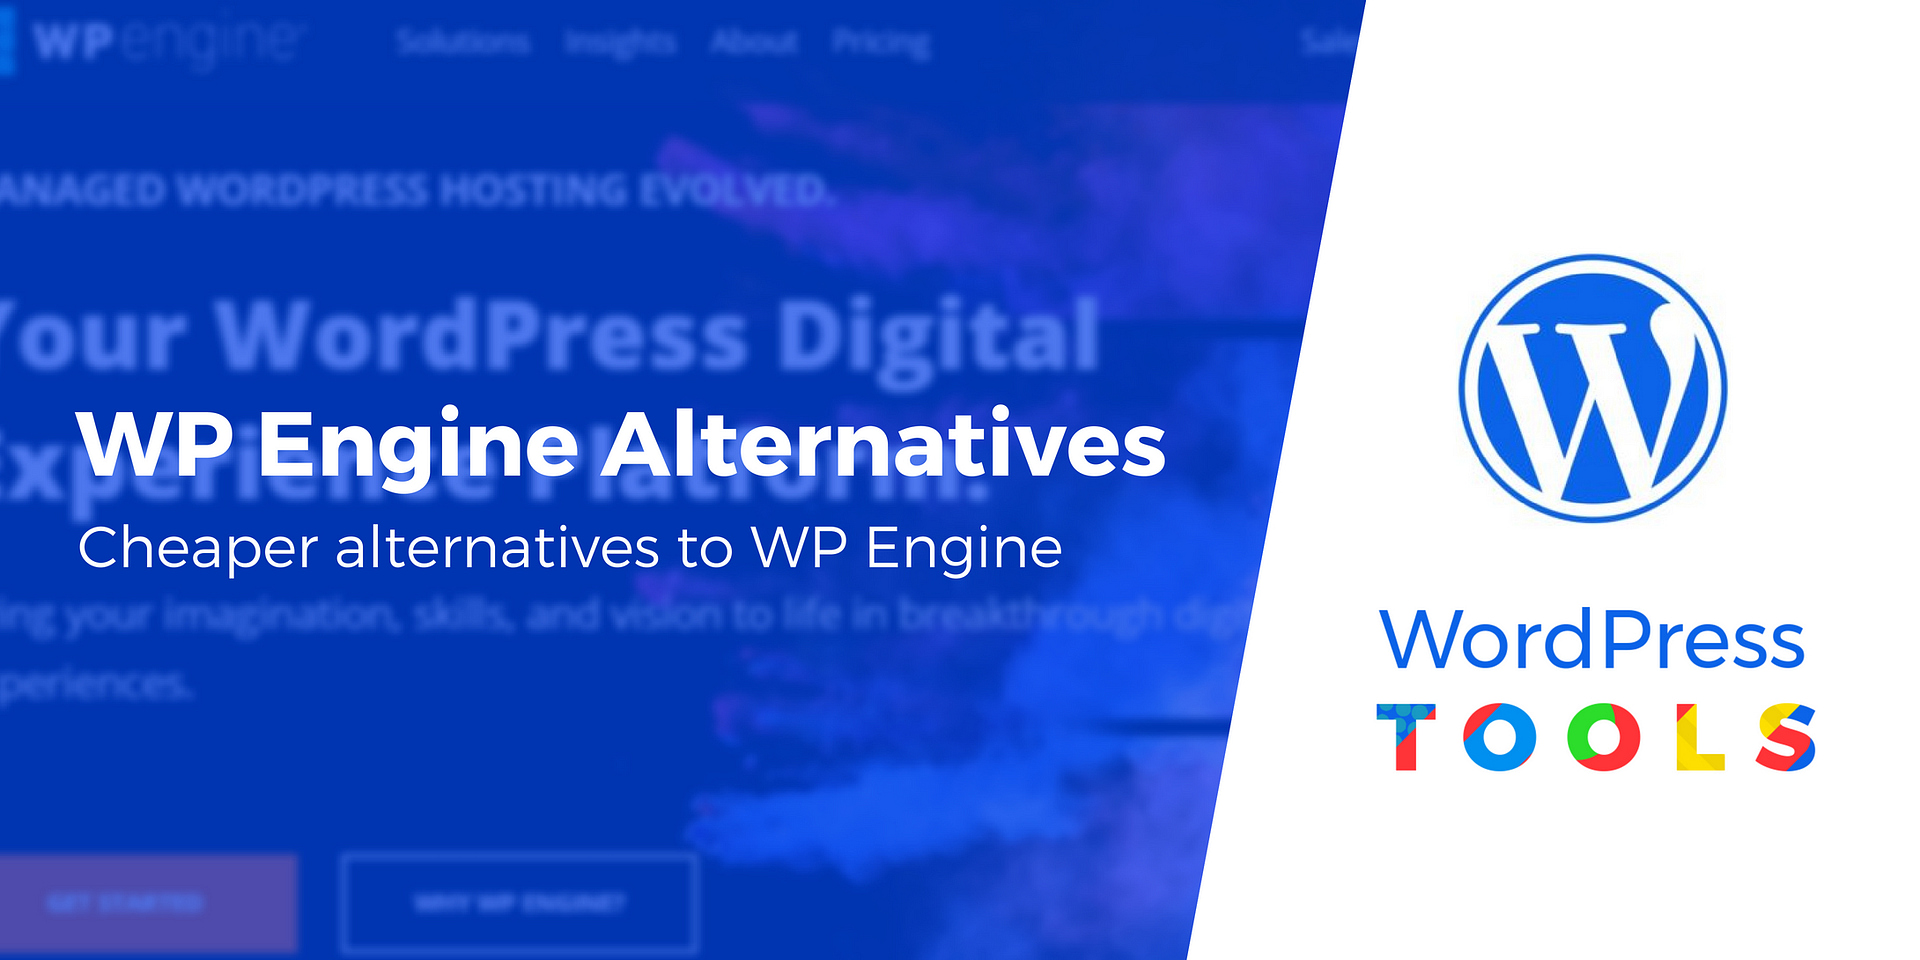 5 Top Cheaper Wp Engine Alternatives For 2020 Images, Photos, Reviews